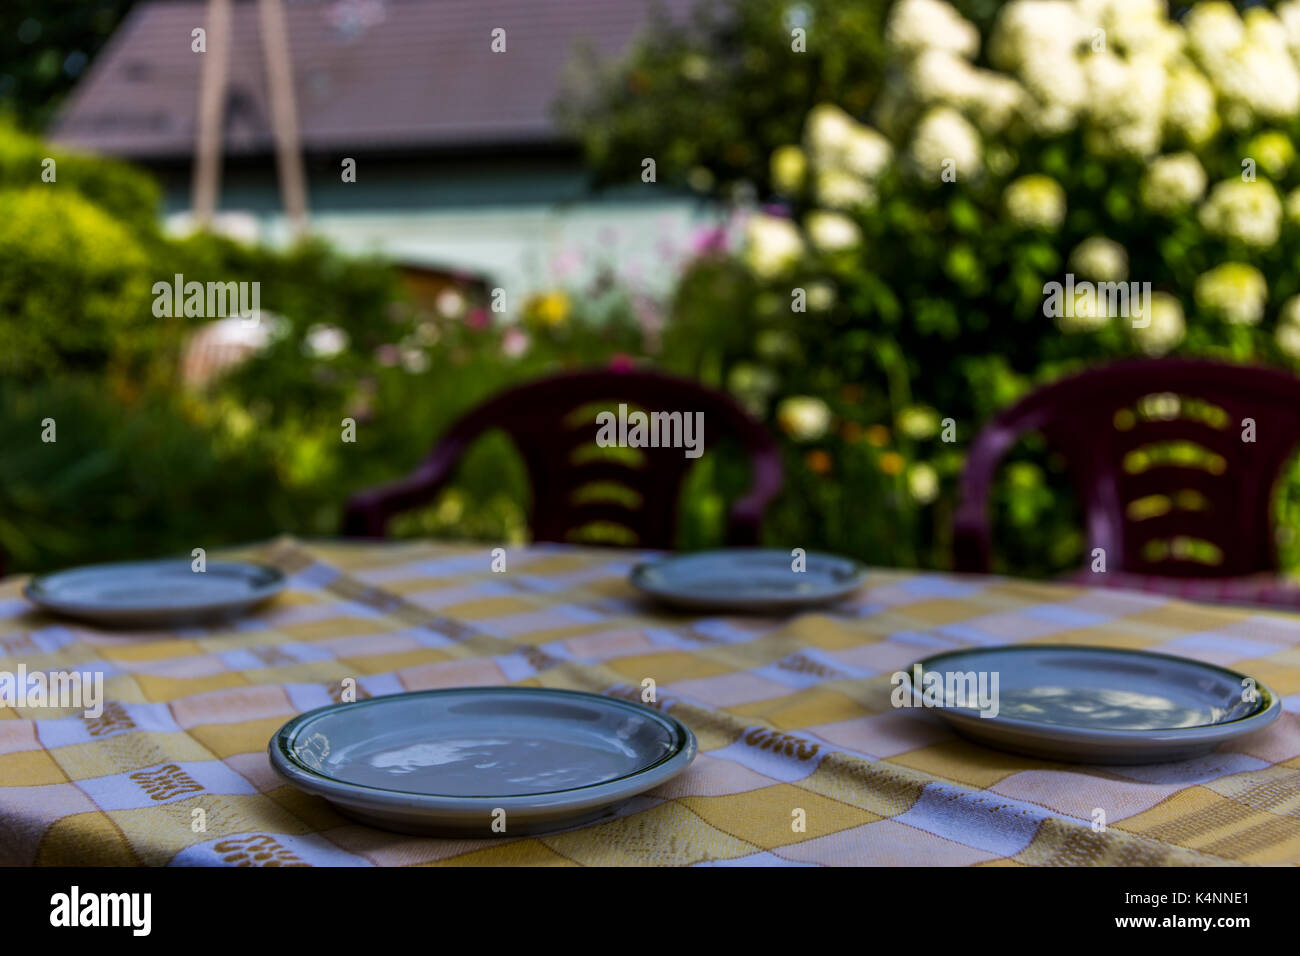 Small plates on a table  with garden in the background. Stock Photo